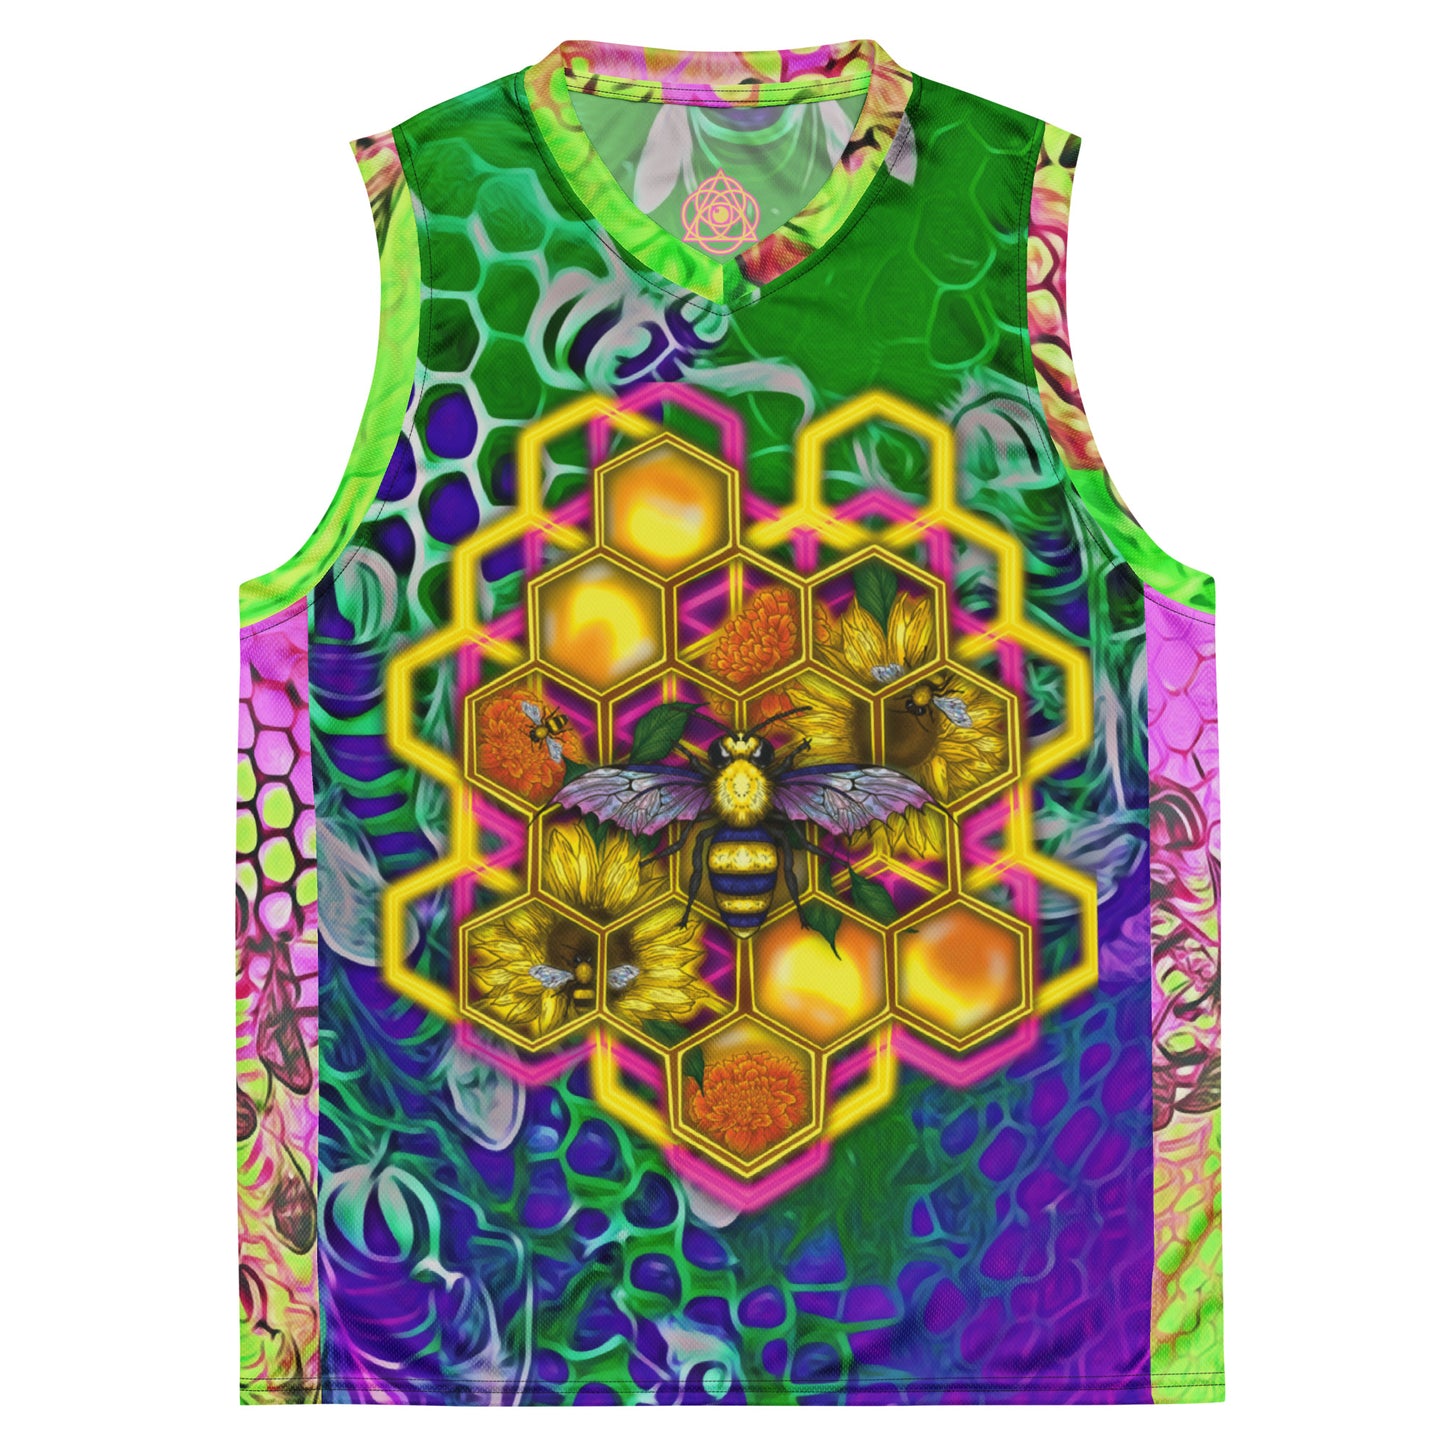 BEEHIVE (Electric Forest Exclusive Unisex Basketball Jersey)